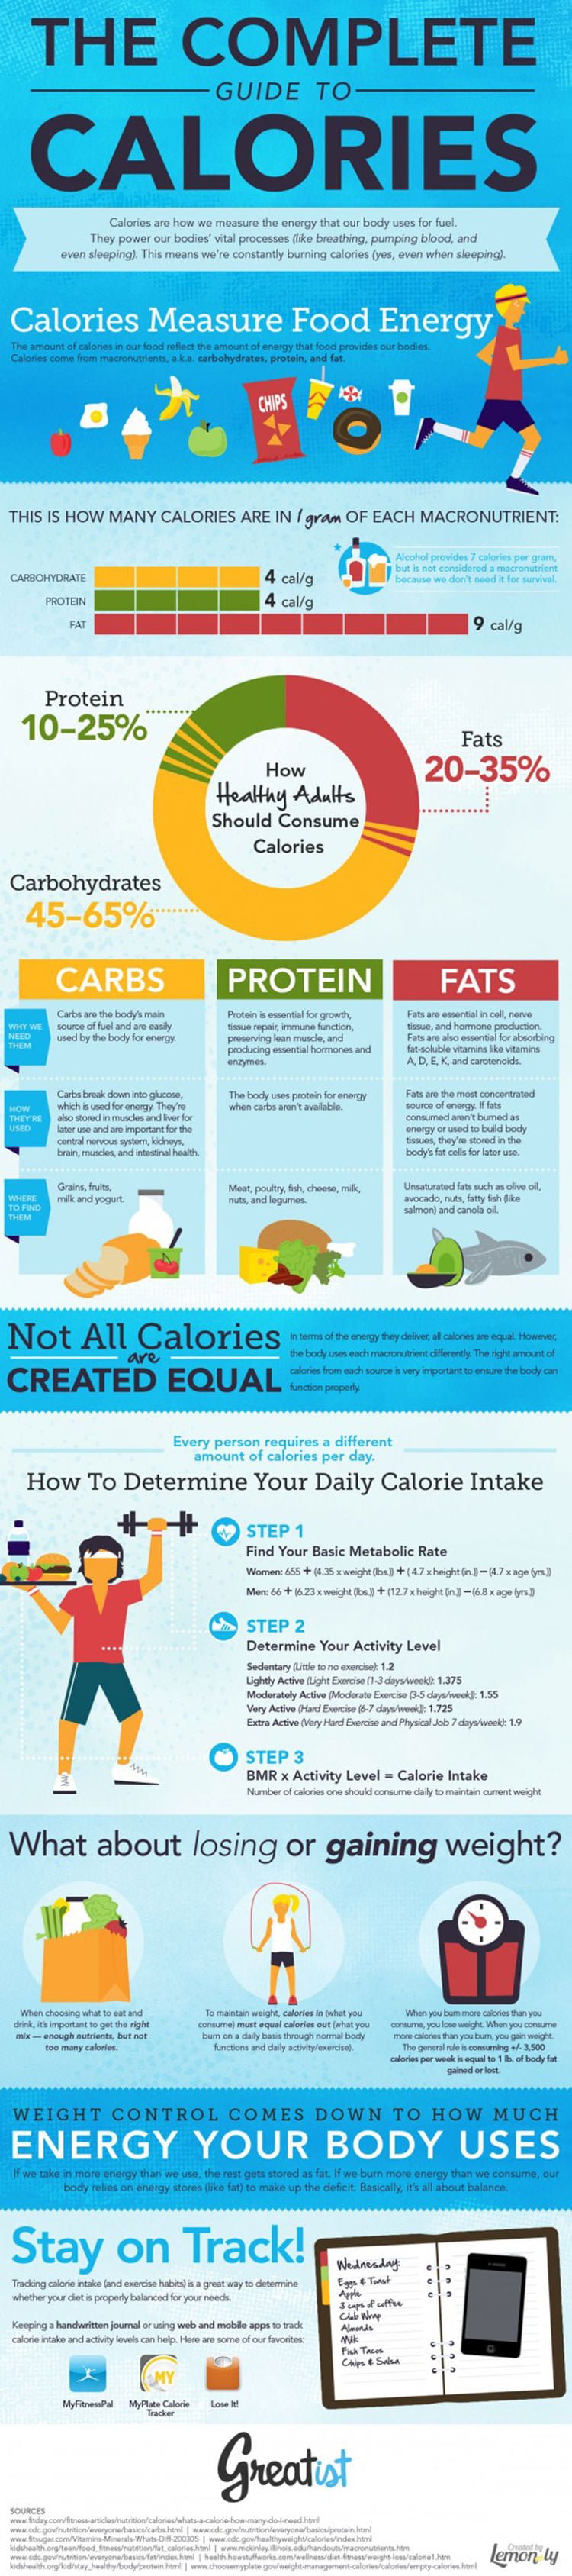 The Complete Guide to Calories Infographic